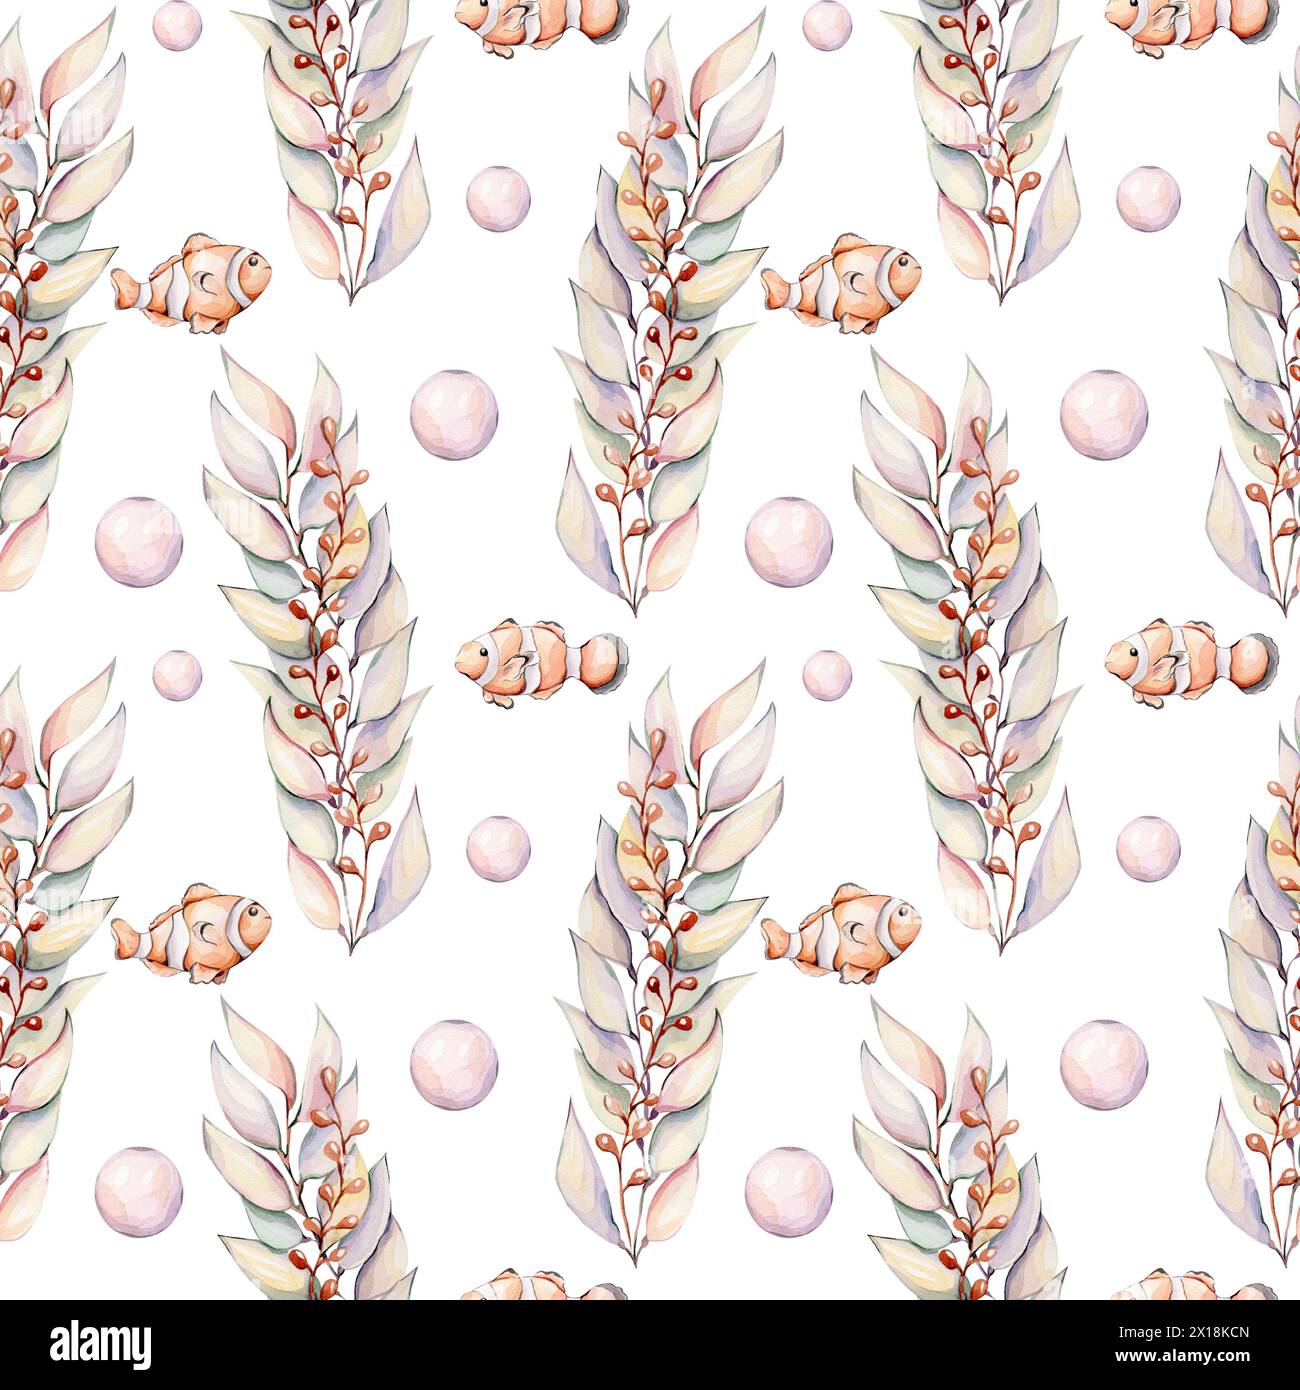 Seamless pattern with fish and seaweed Stock Photo